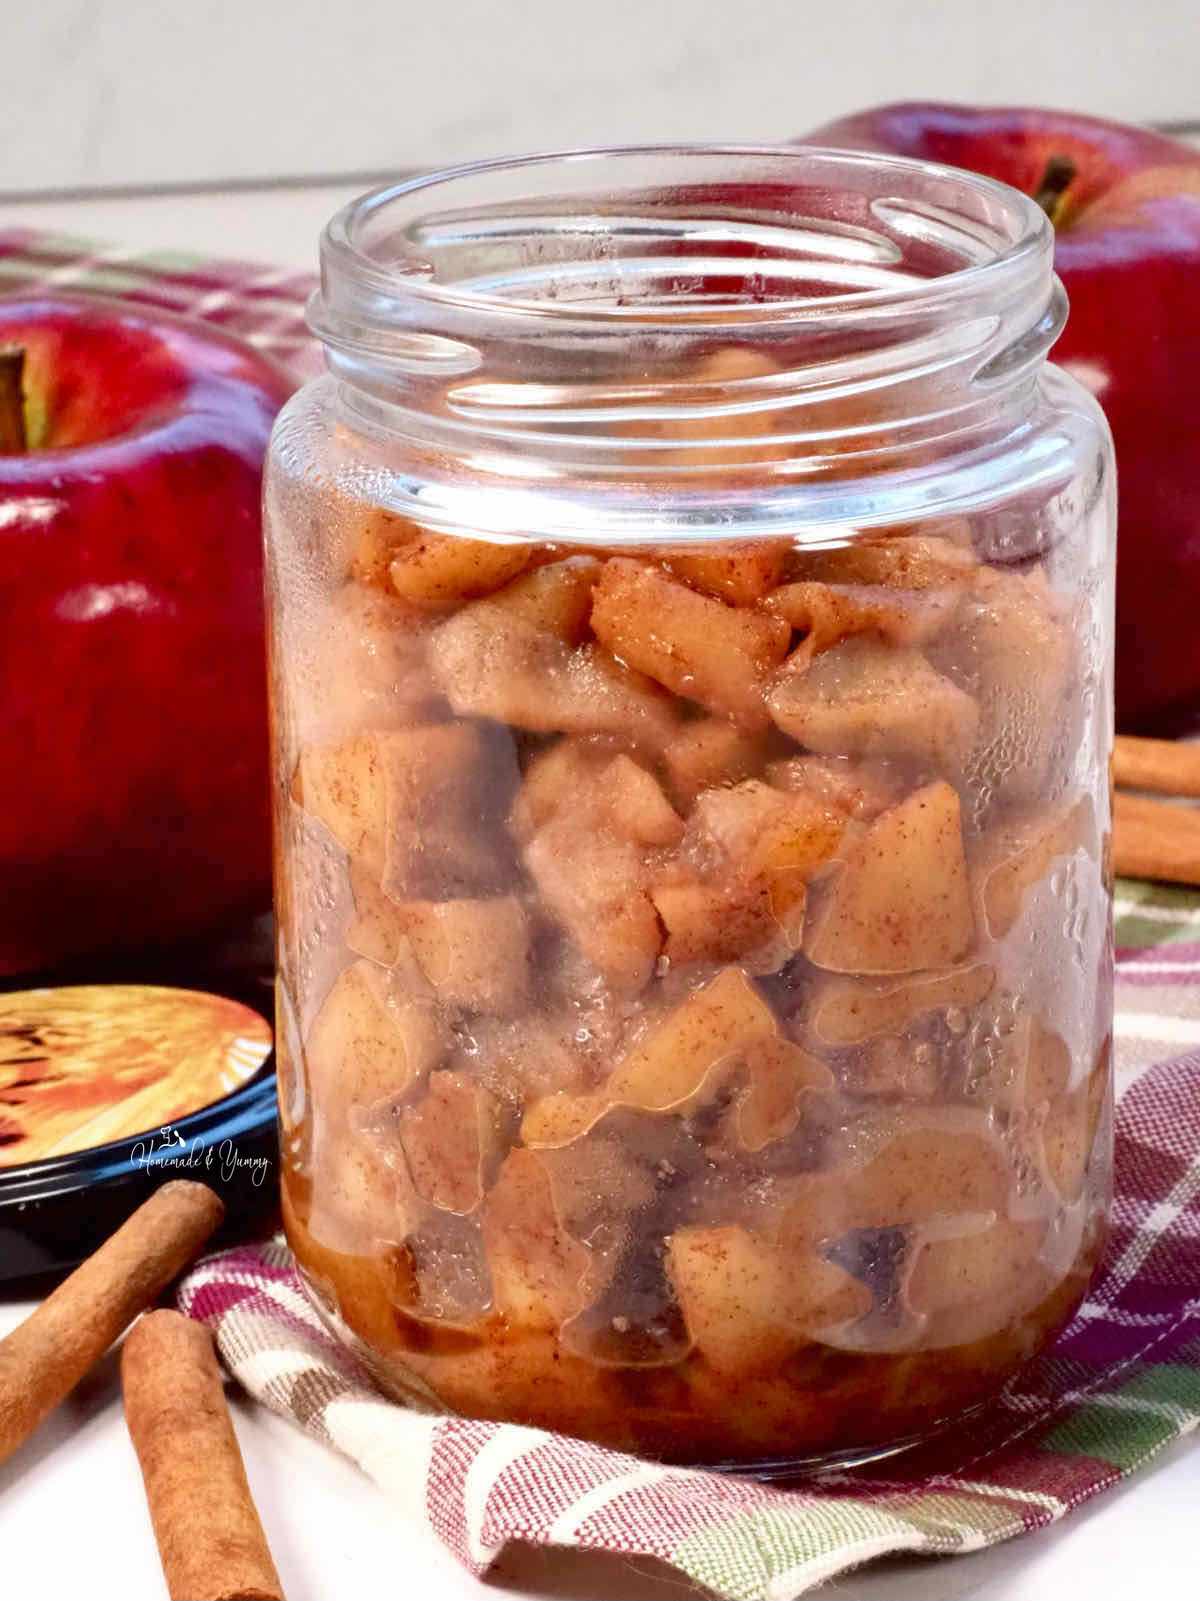 Spiced apple compote in a glass jar.